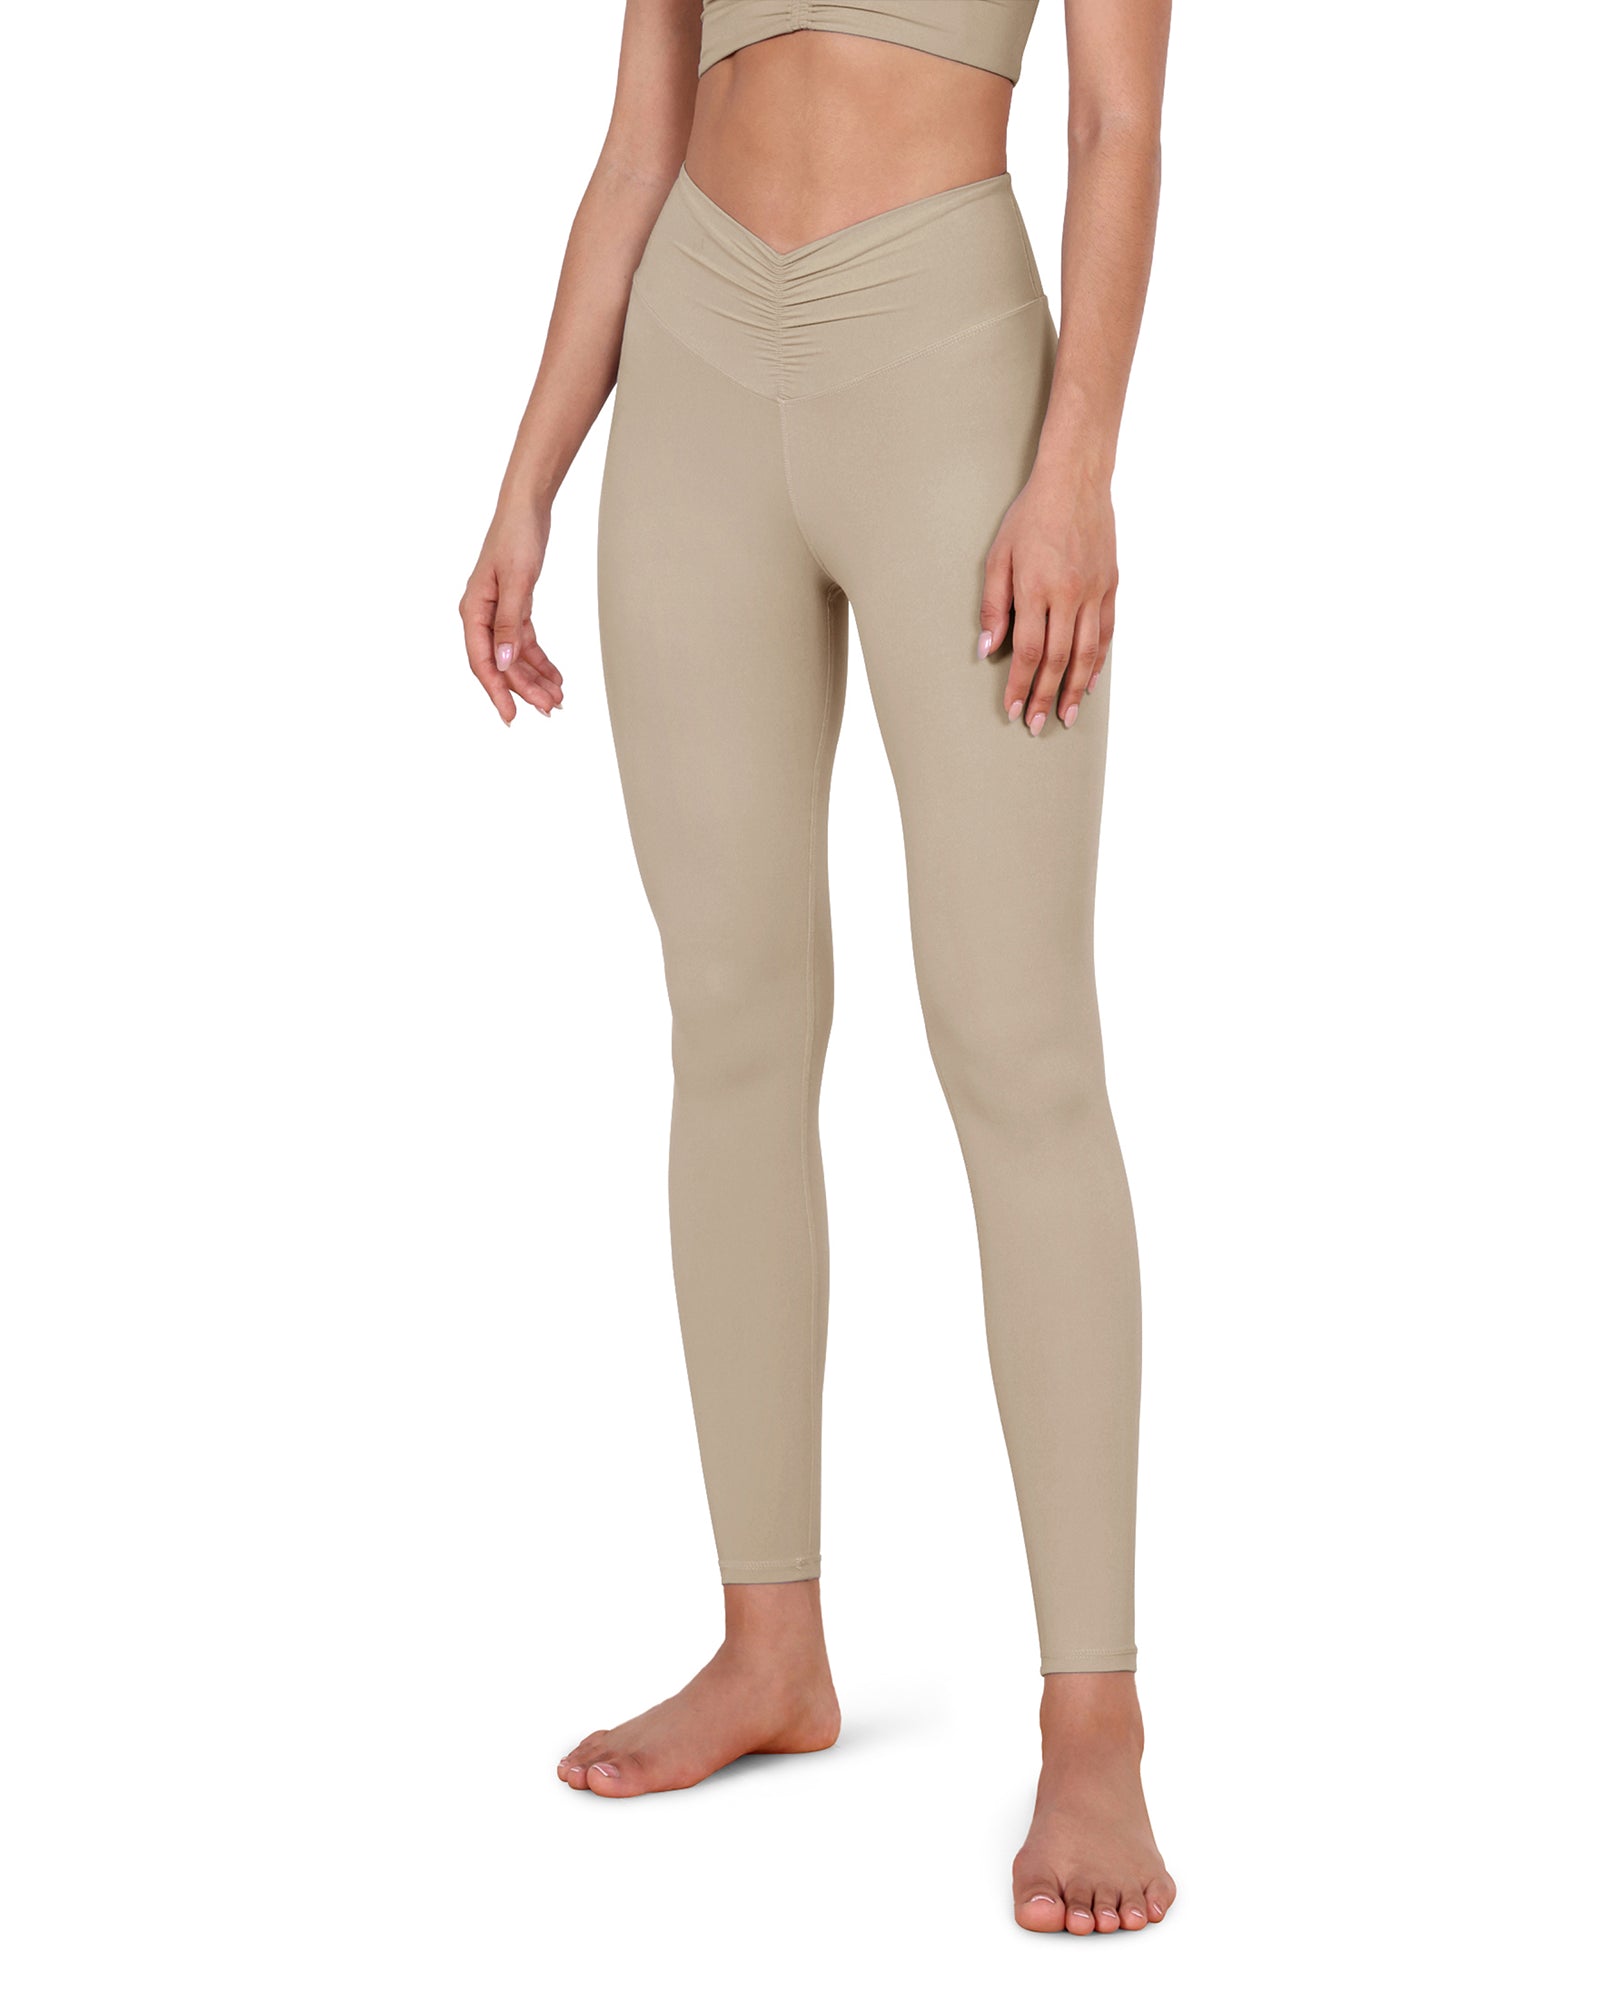 High Waist Crossover Ruched Leggings - ododos